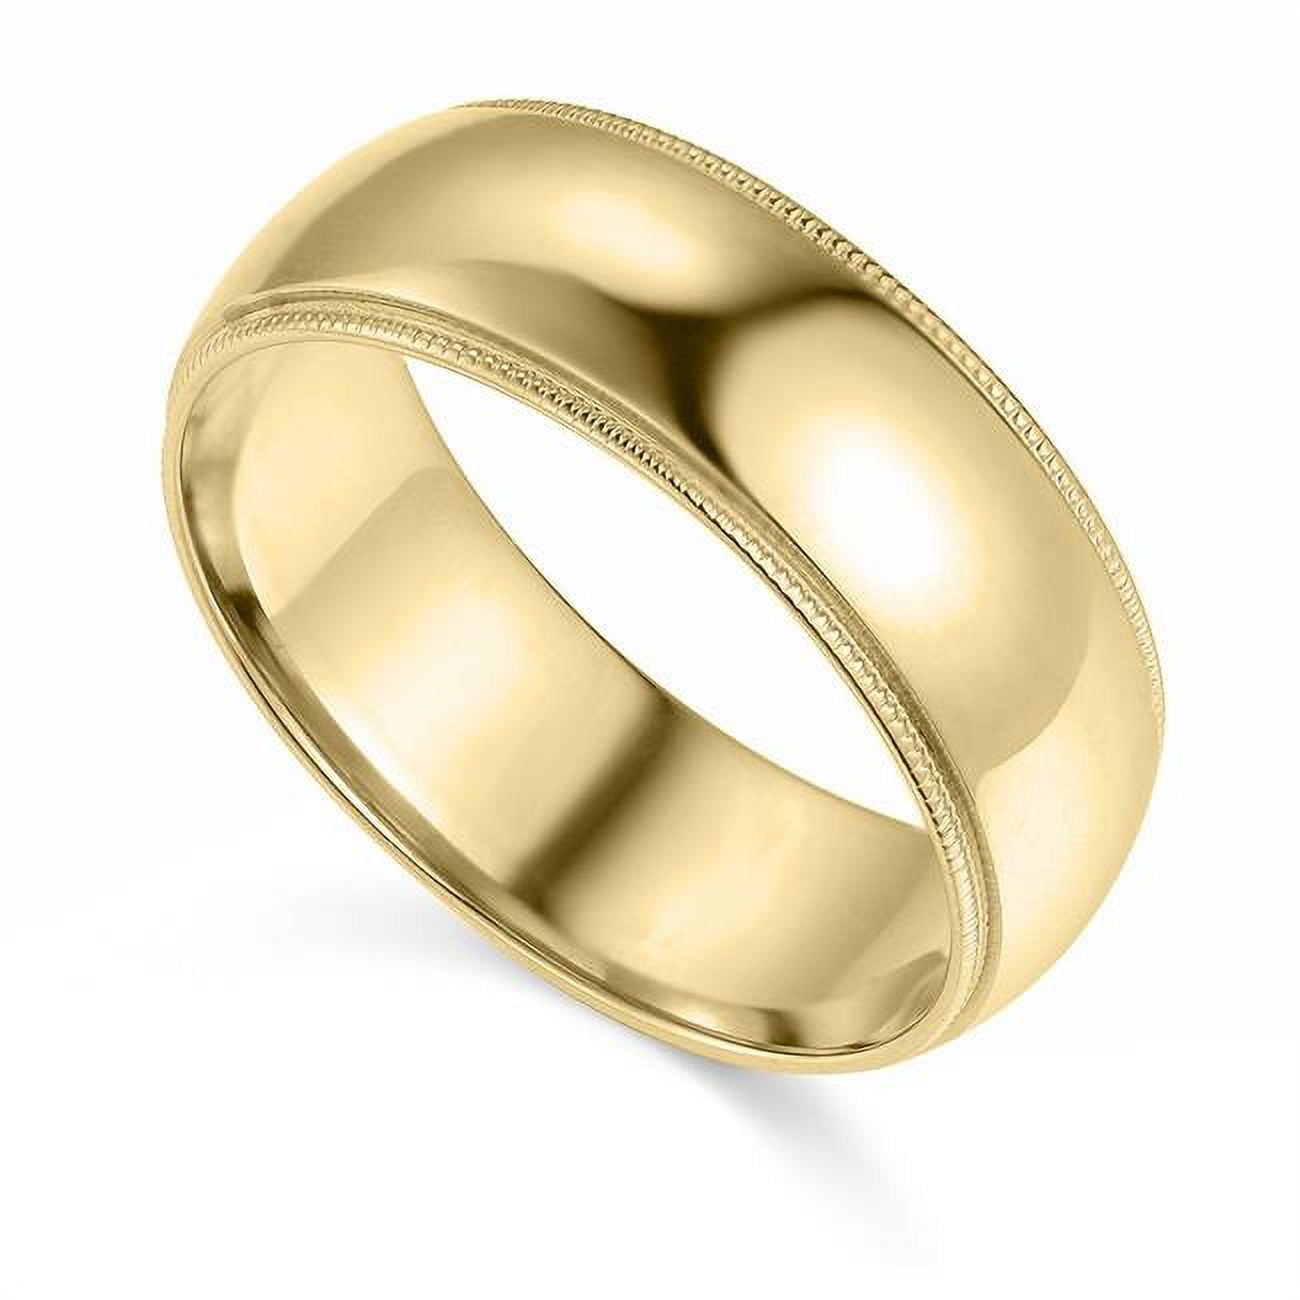 Picture of Precious Stars BMC-070-5.5 7 mm 14K Yellow Gold Comfort-fit Milgrain & Polished Wedding Band - Size 5.5